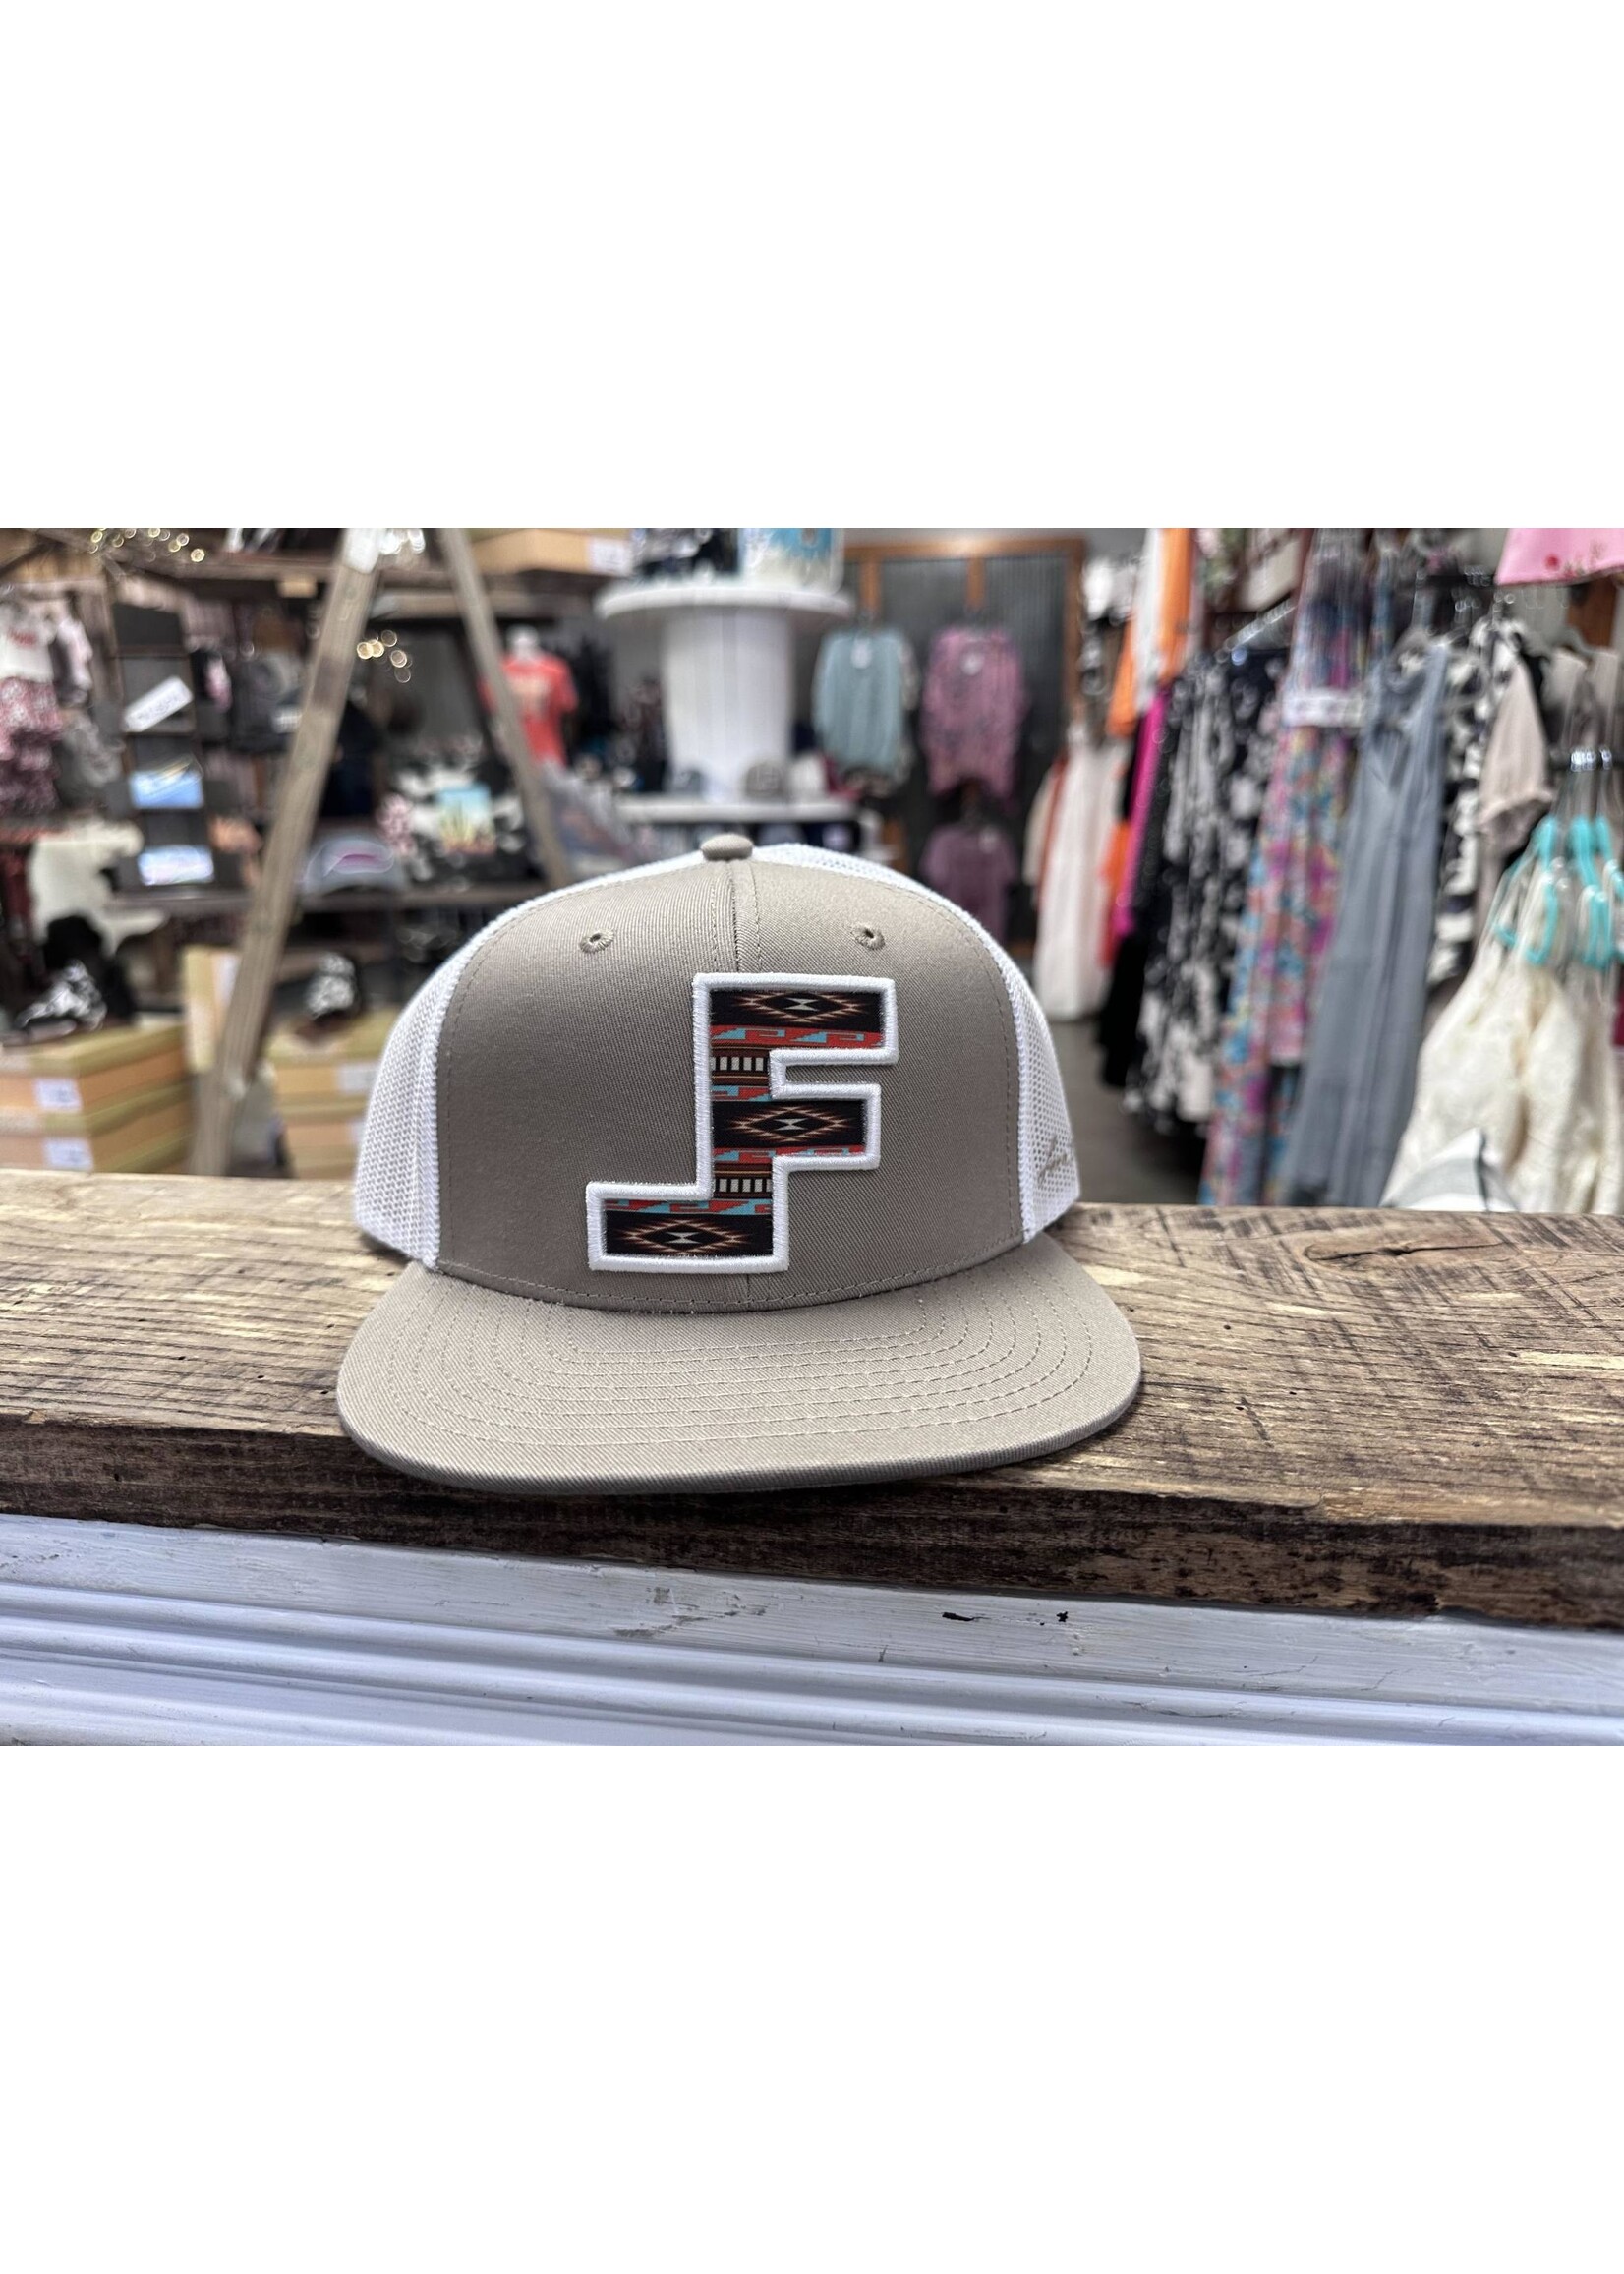 Lane Frost Lane Frost Youth Hats